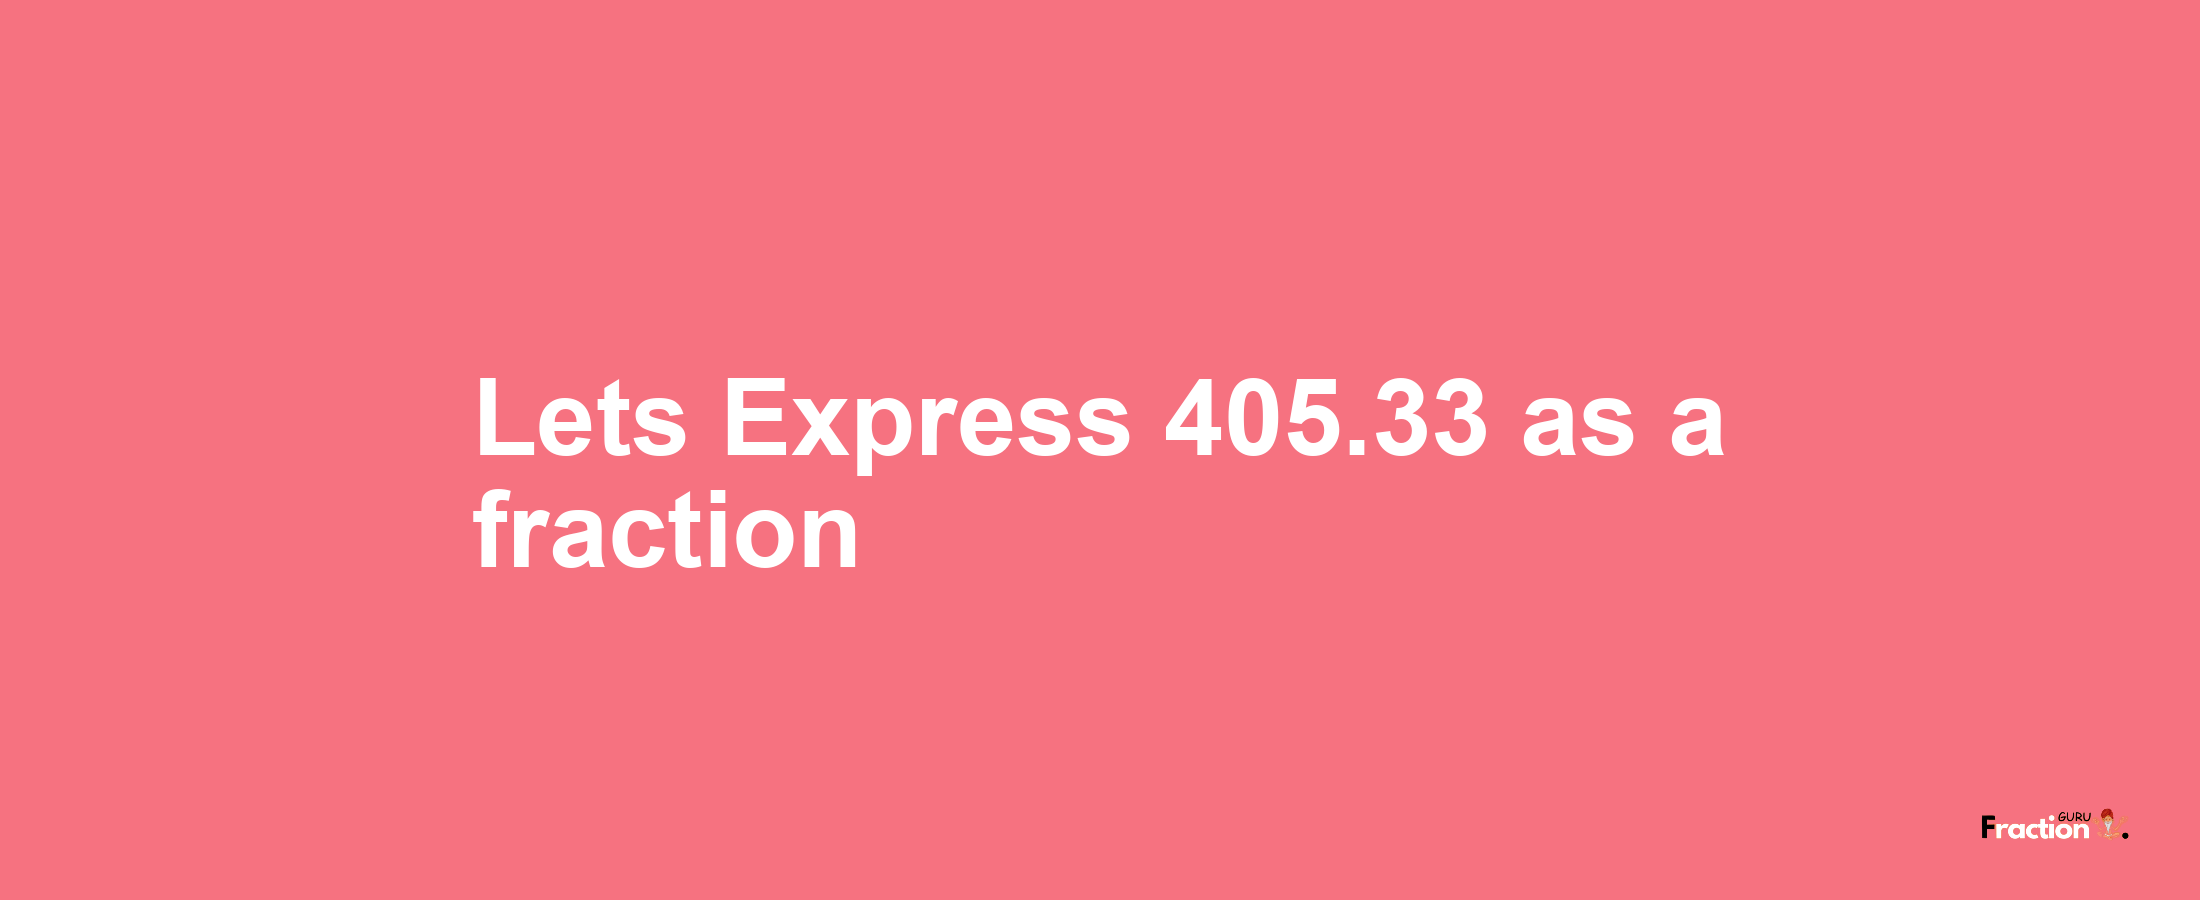 Lets Express 405.33 as afraction